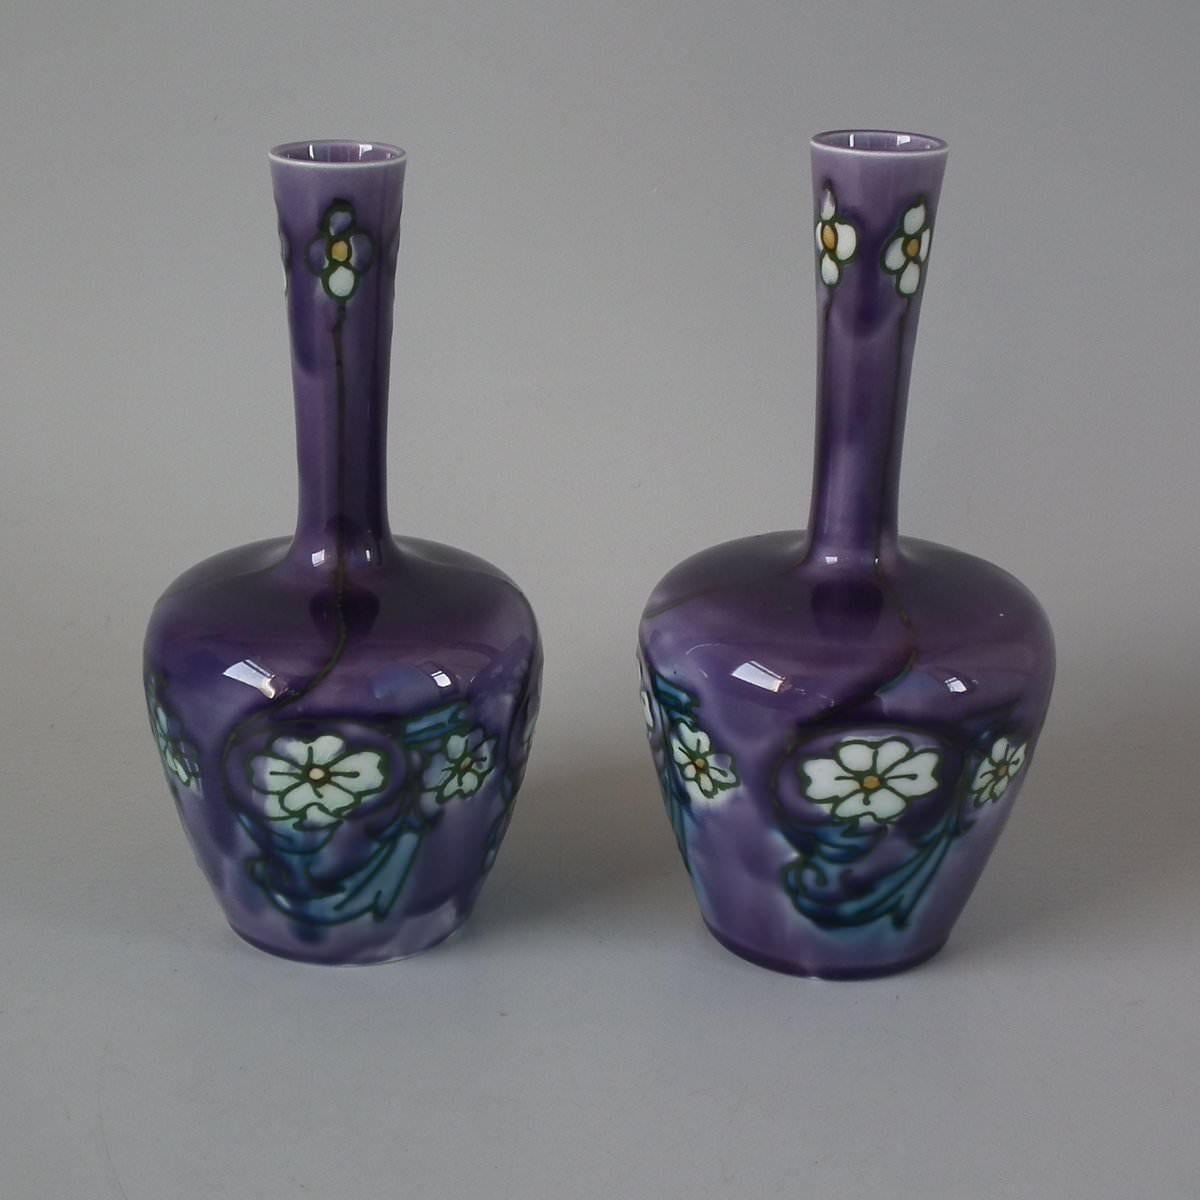 Pair of Minton Secessionist fluted vases, decorated with typical Art Nouveau stylized flowers and leaves. Green tube lining detail, on purple ground. Printed maker's marks 'MINTONS LTD No.33' to the underside.